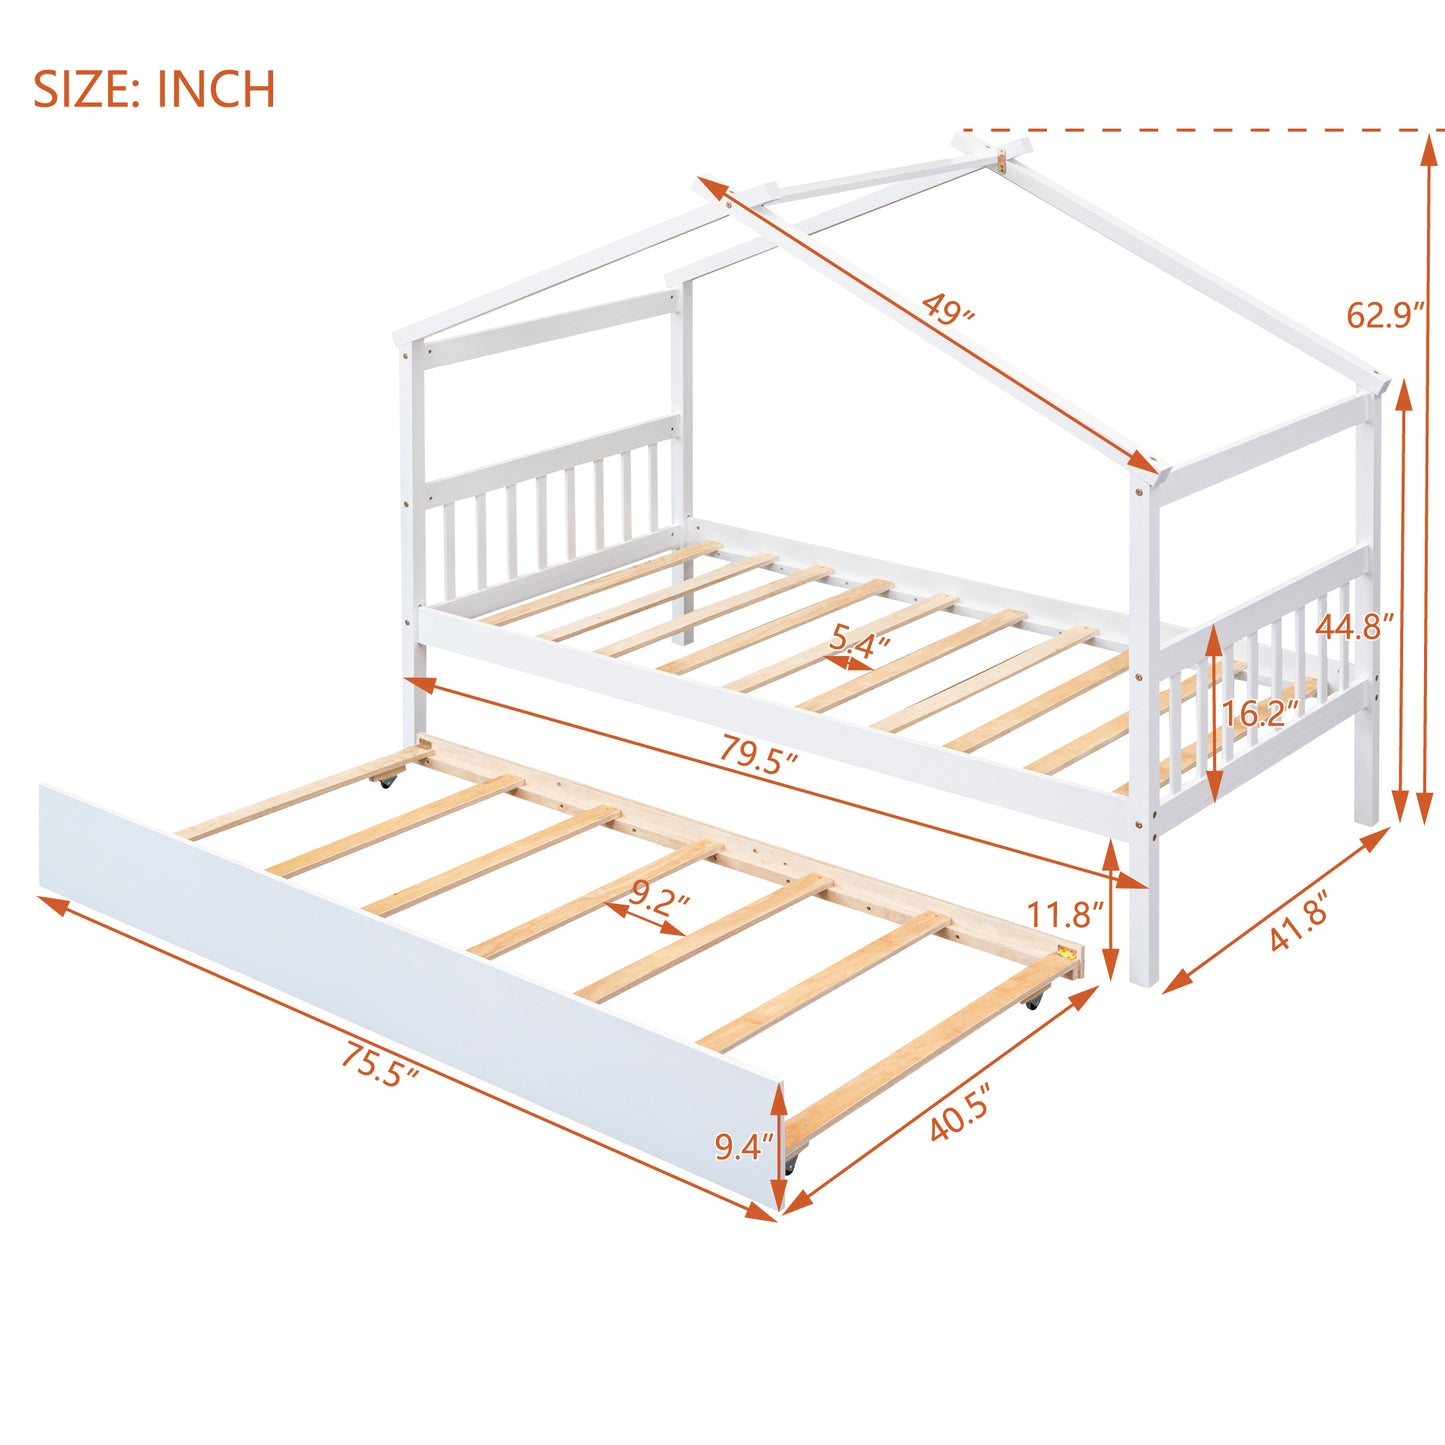 Twin Size Wooden House Bed with Twin Size Trundle, White